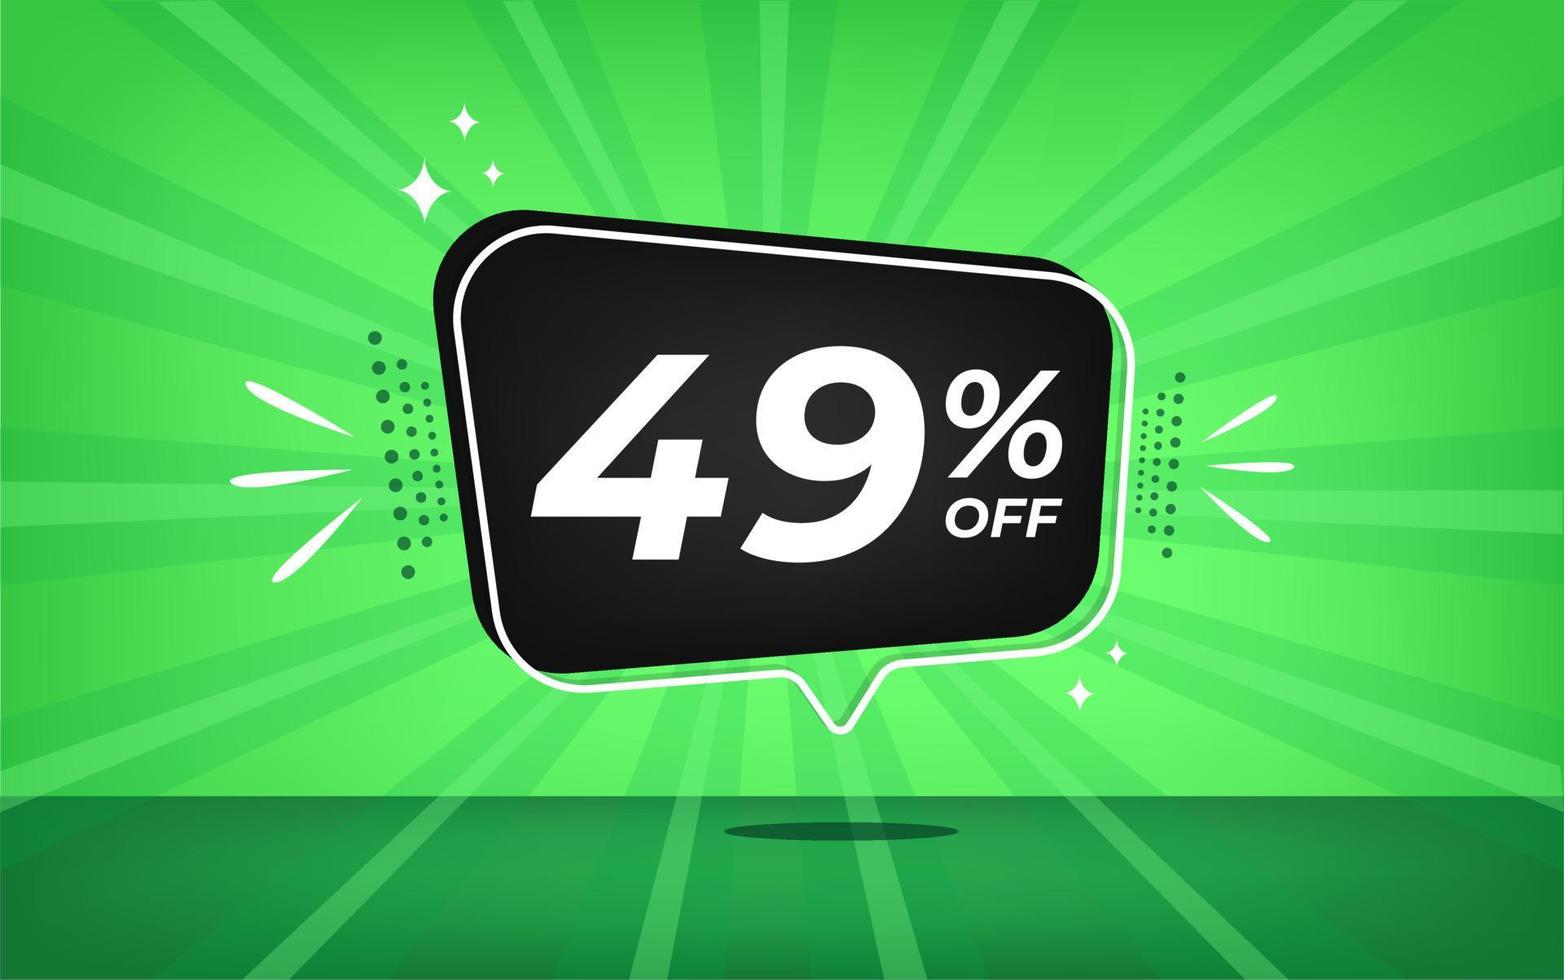 49 percent off. Green banner with forty-nine percent discount on a black balloon for mega big sales. vector